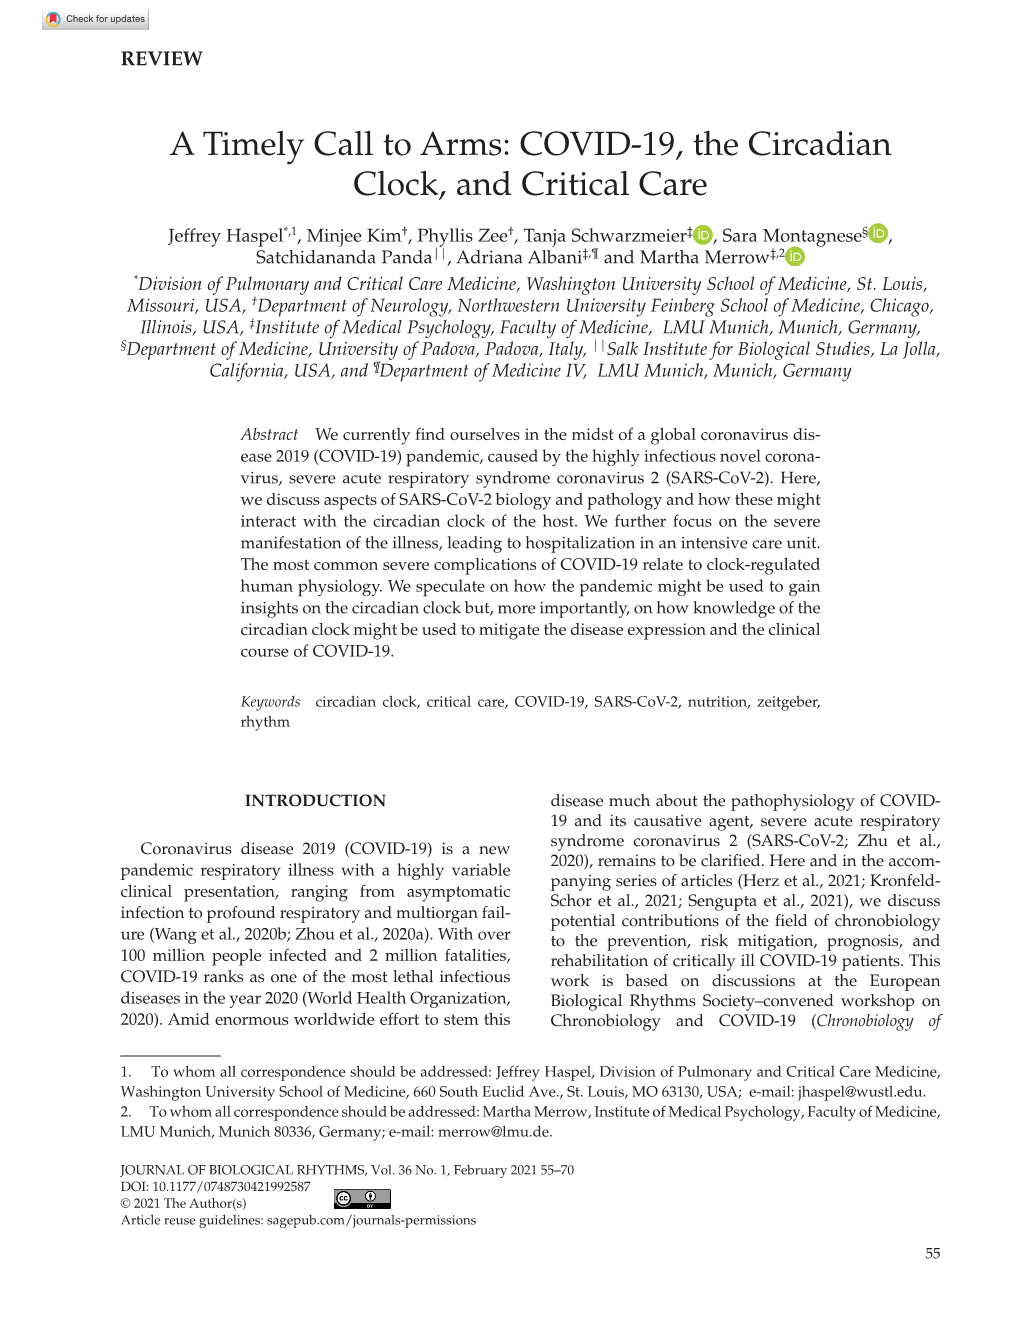 COVID-19, the Circadian Clock, and Critical Care